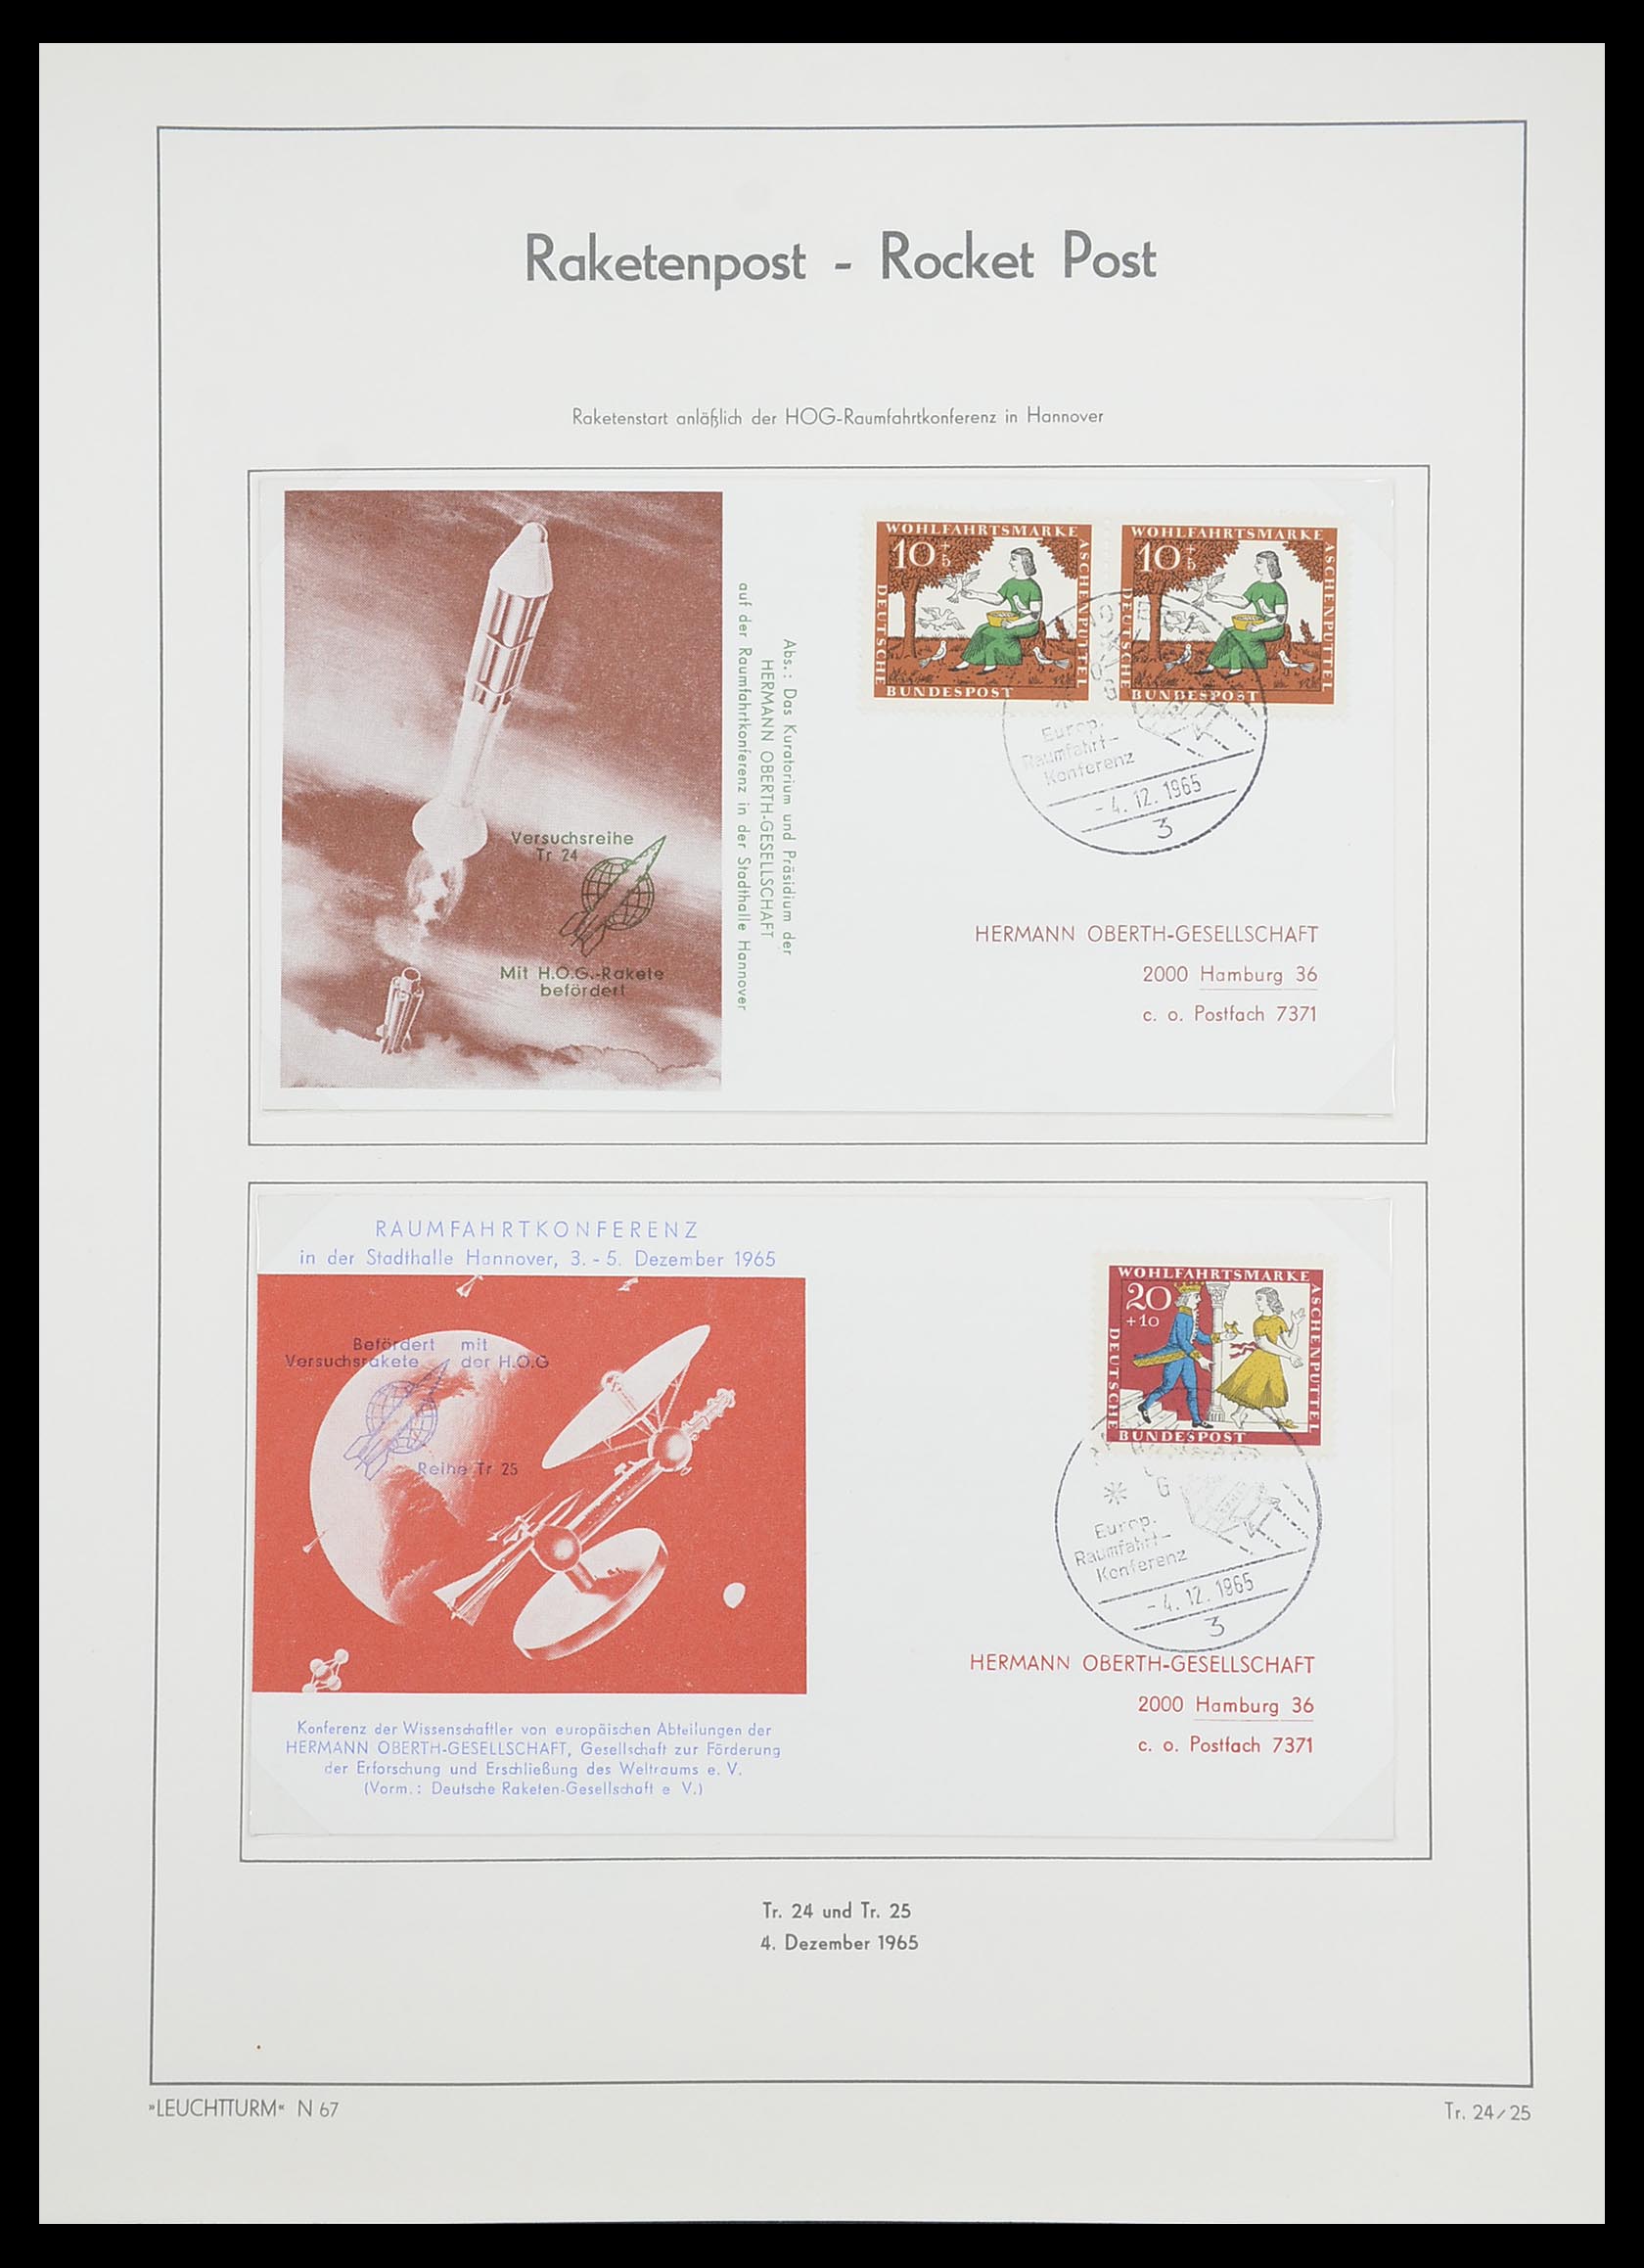 33463 084 - Stamp collection 33463 Rocket mail covers.